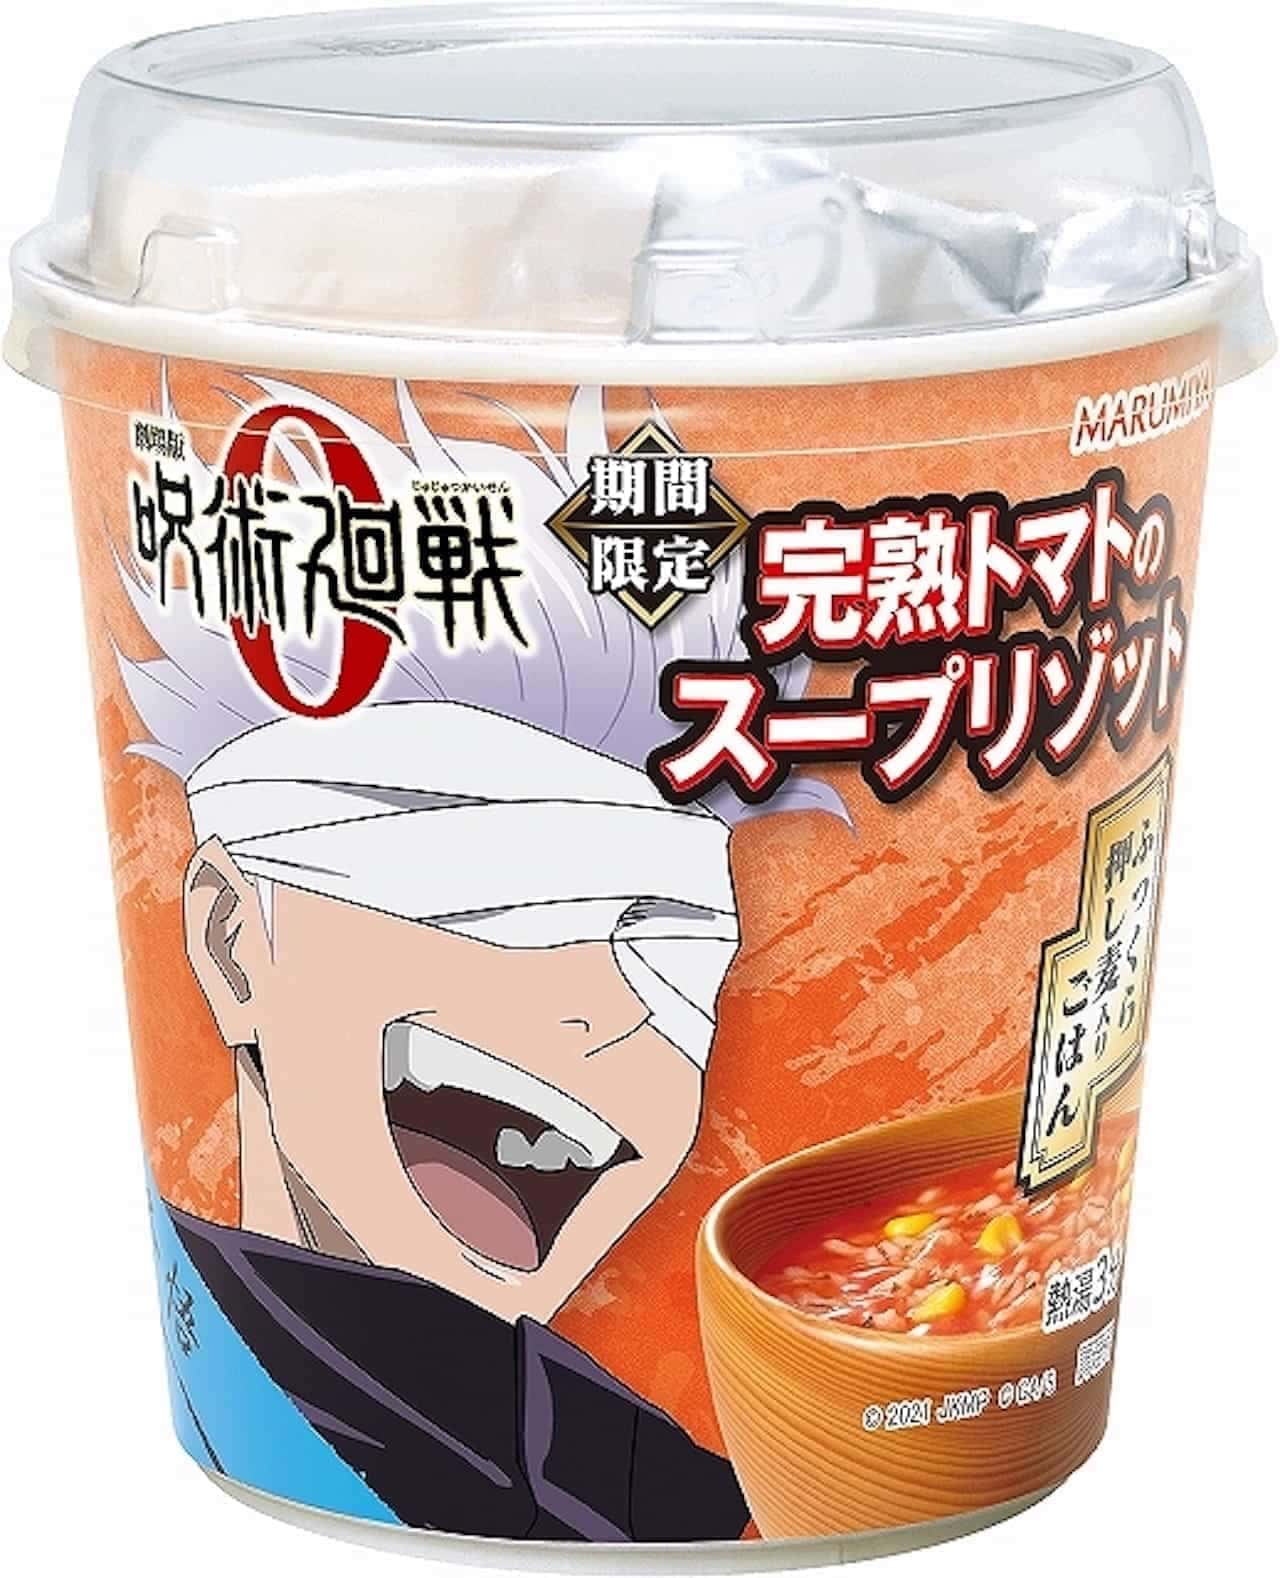 "Jujutsu Kaisen Ripe Tomato Soup Risotto for a Limited Time" from Marumiya